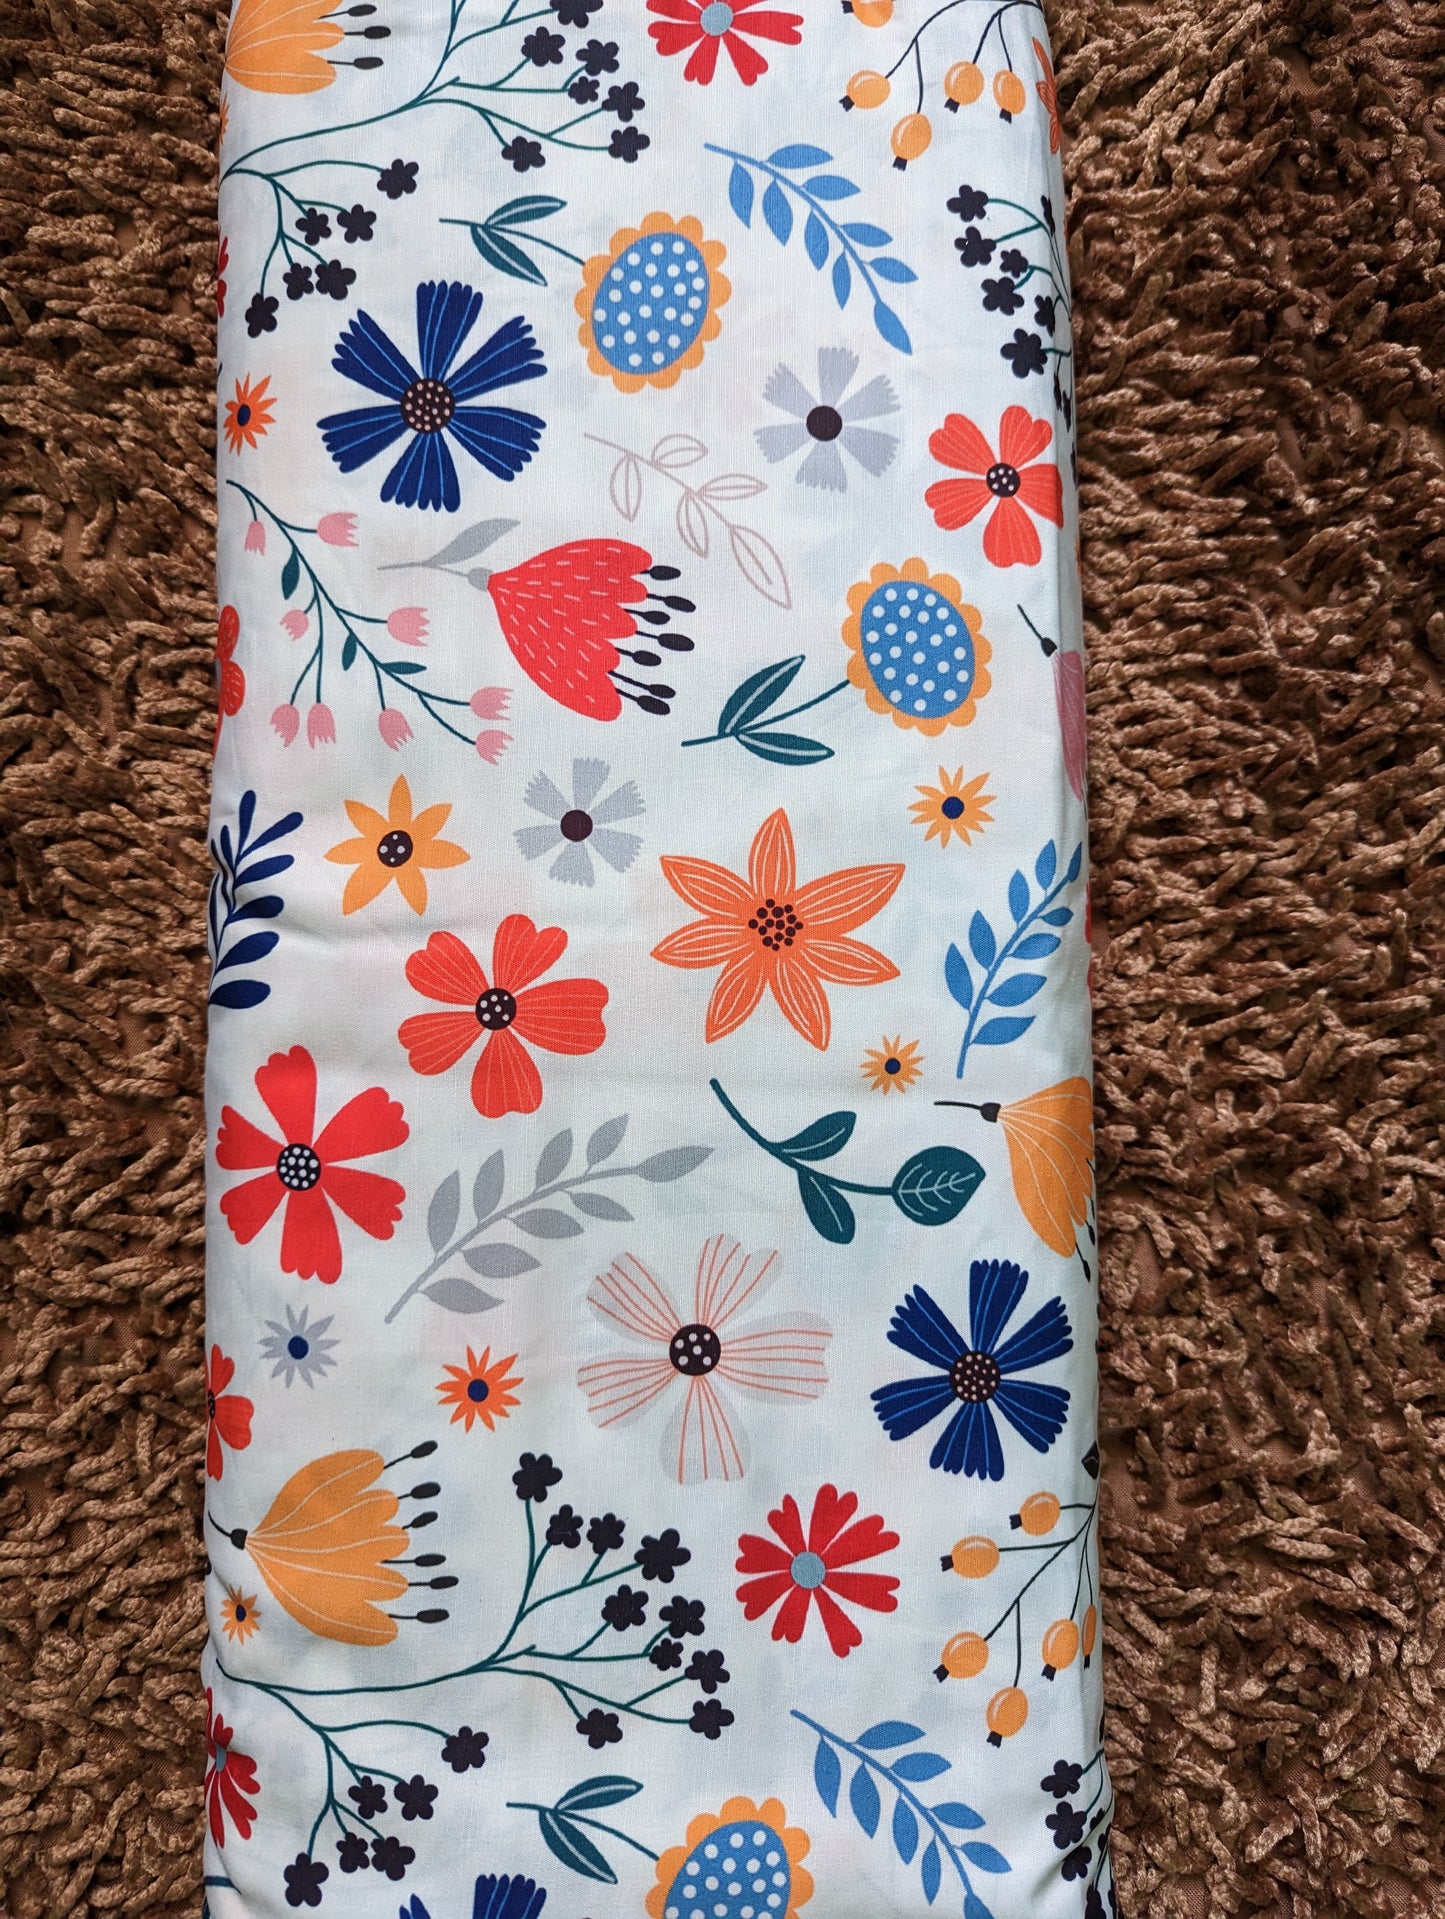 Cotton popline 58" width Fabric - Signature floral in white base